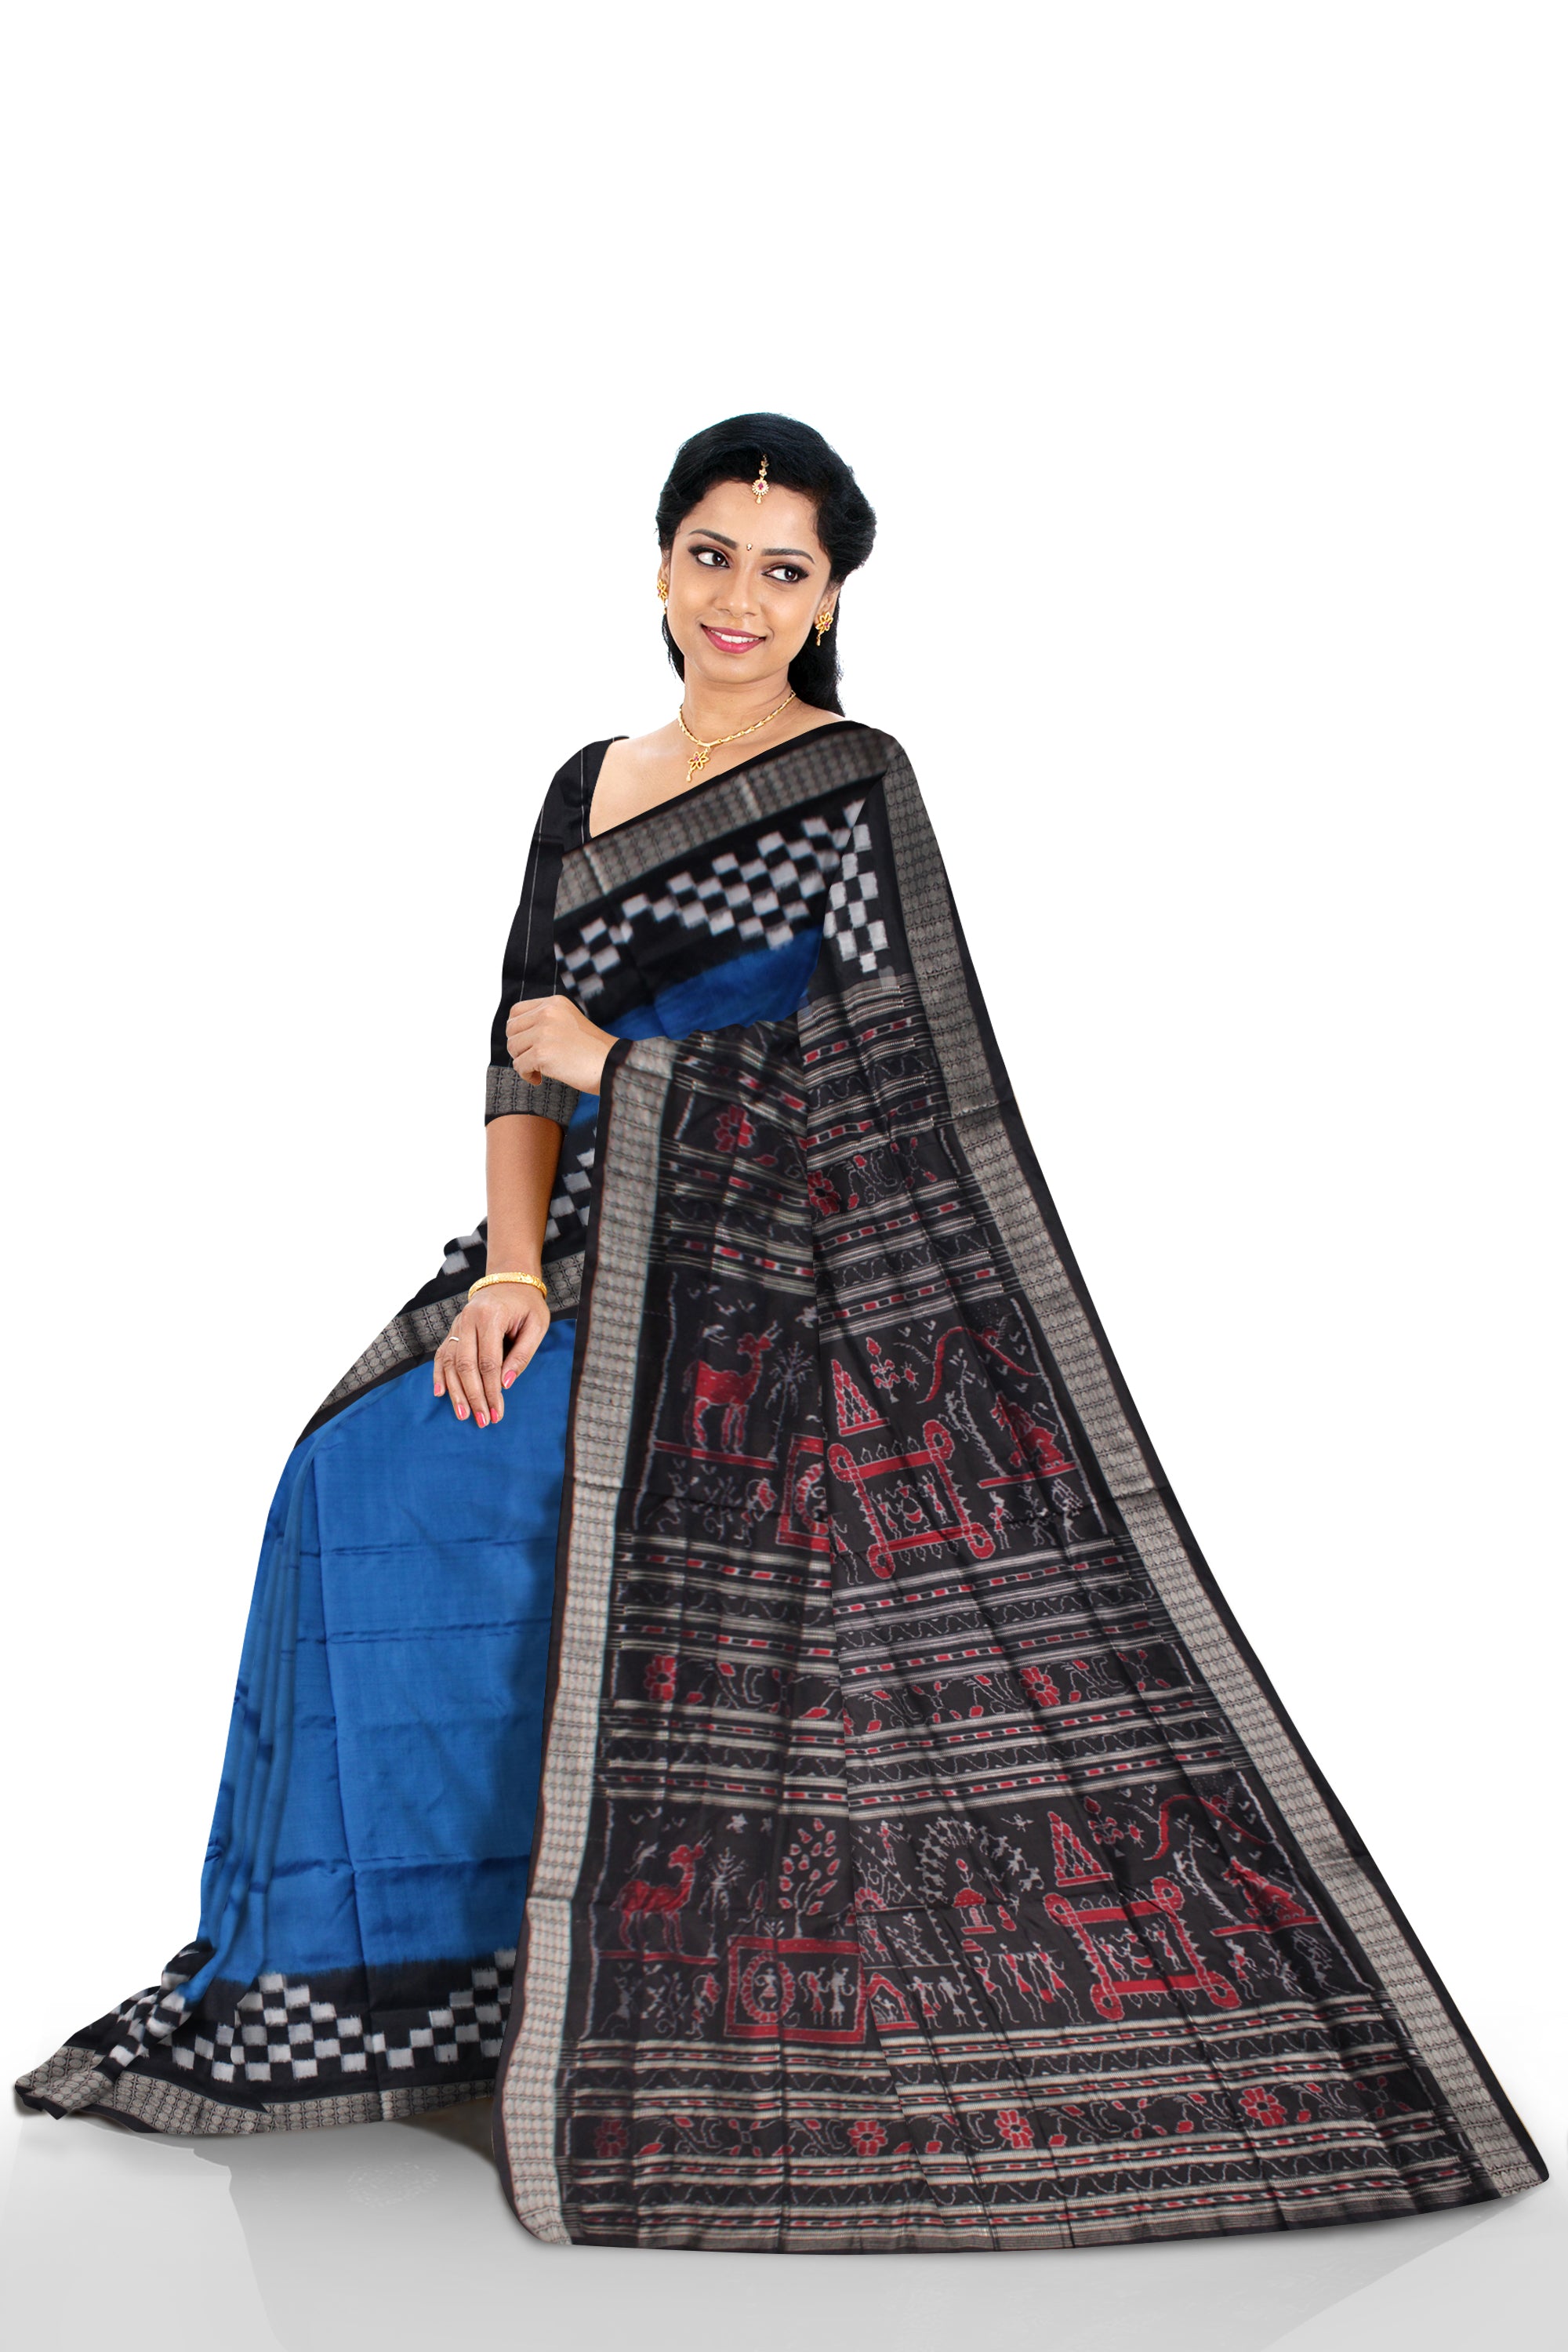 TRAIDITIONAL TERRACOTTA PATTERN PALLU WITH BORDER PASAPALI PATTERN PURE SILK SAREE IS BLUE AND BLACK COLOR BASE,WITH BLOUSE PIECE. - Koshali Arts & Crafts Enterprise